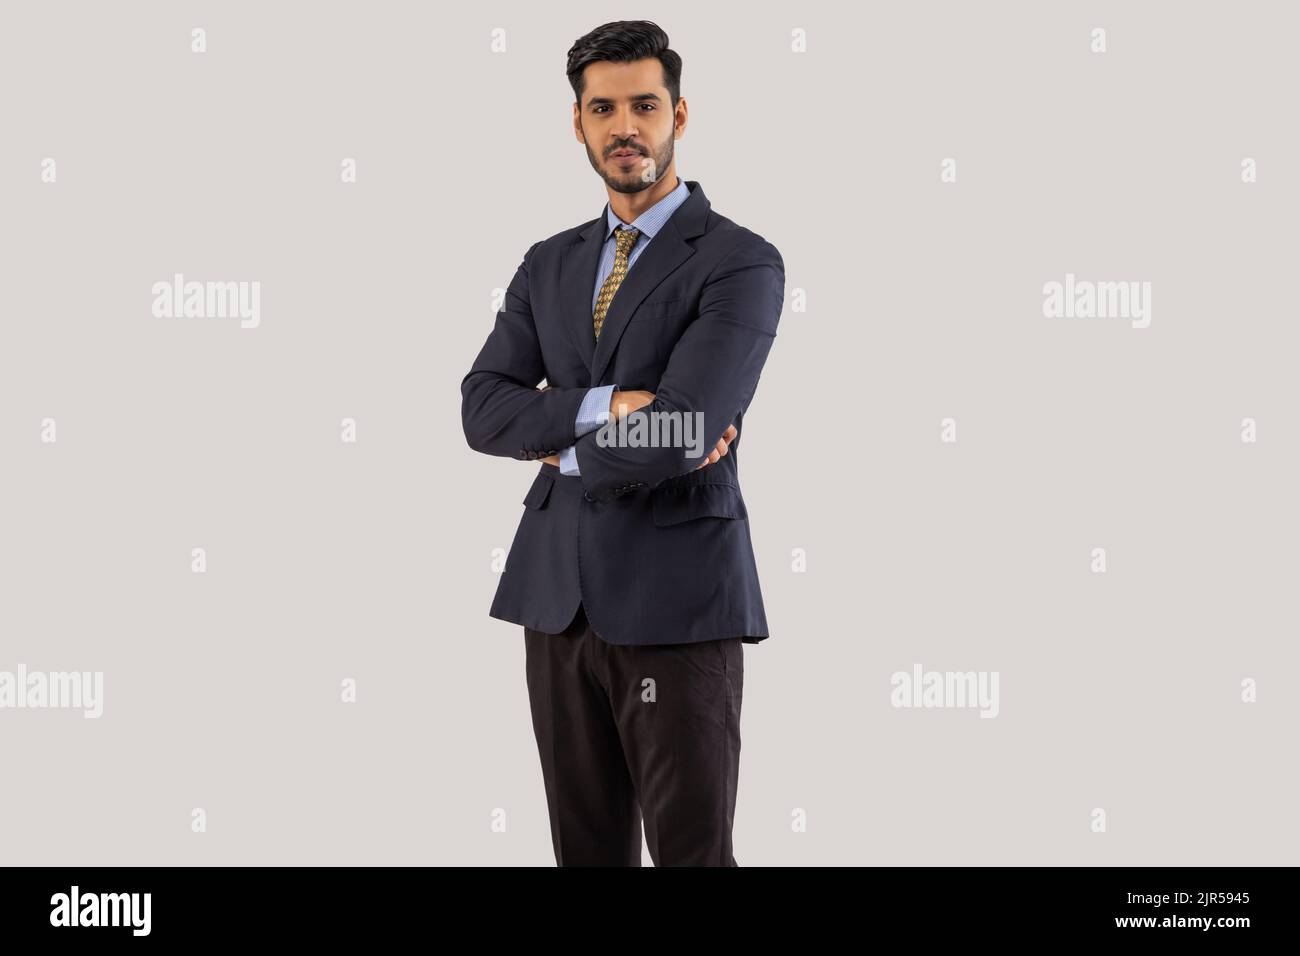 Portrait of a corporate employee in formal business suit standing cross-armed. Stock Photo